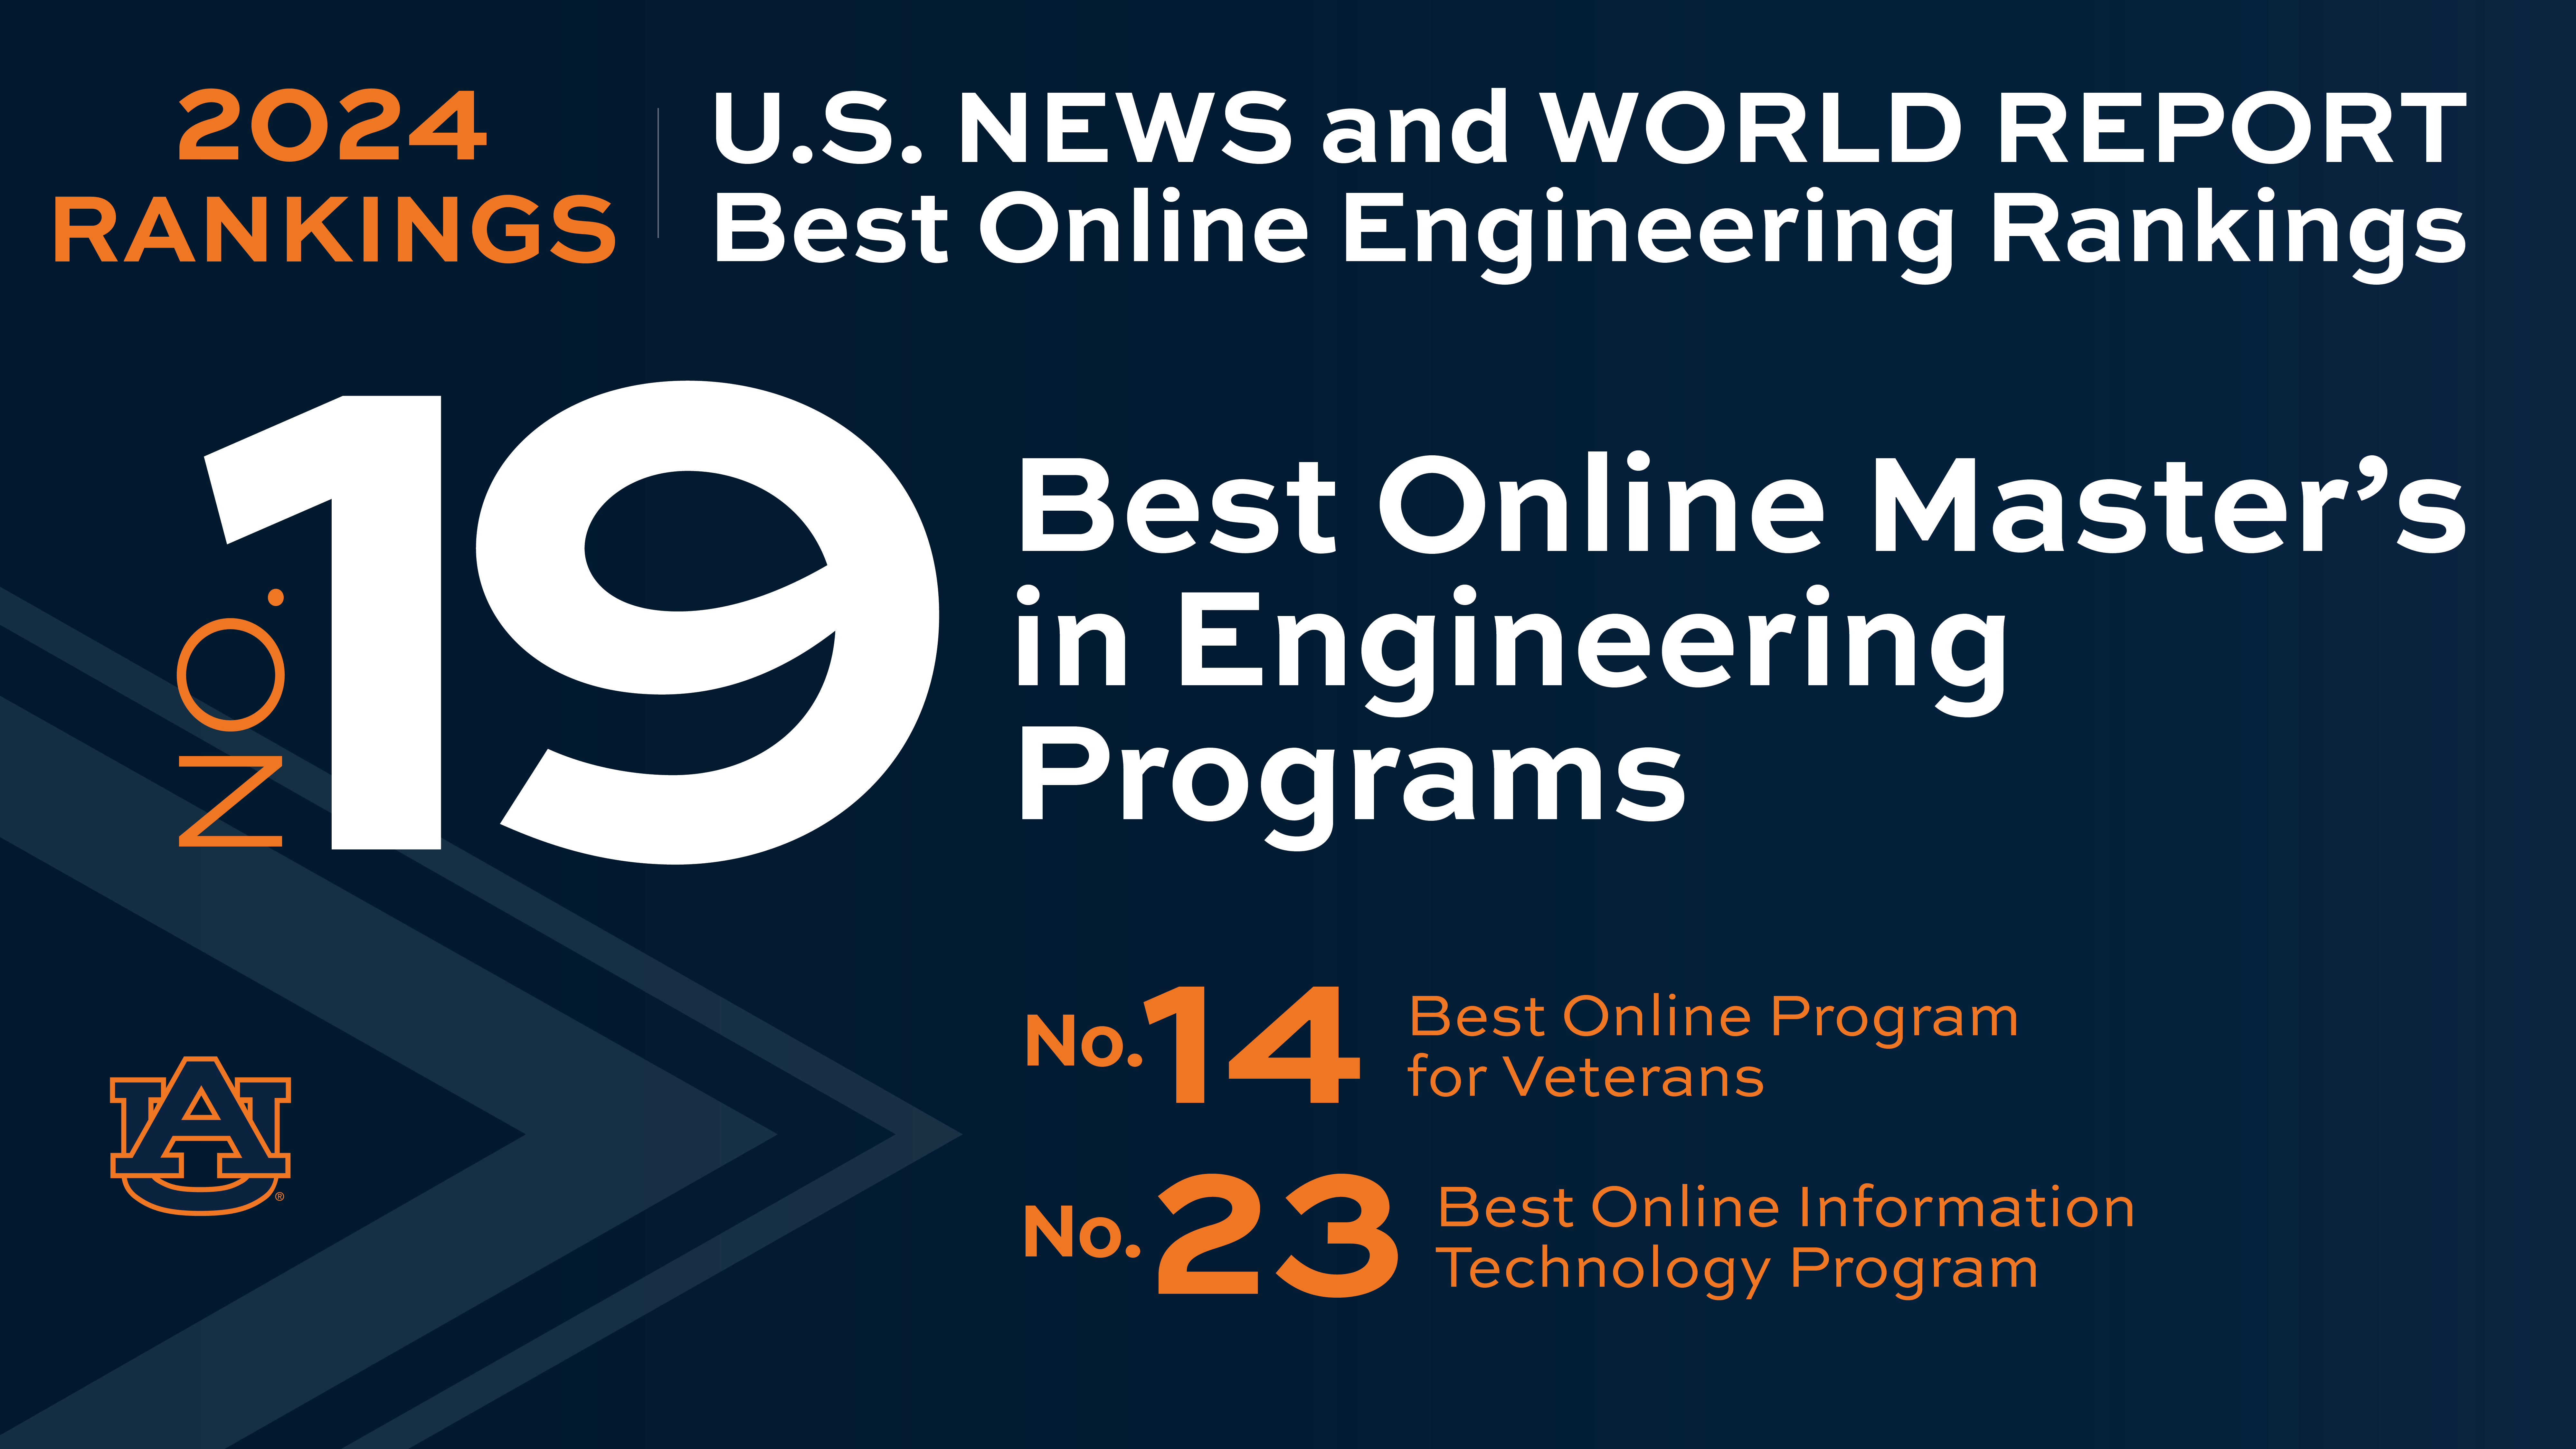 Auburn Engineering has been ranked four consecutive years in the top 20 and eight consecutive years in the top 25.